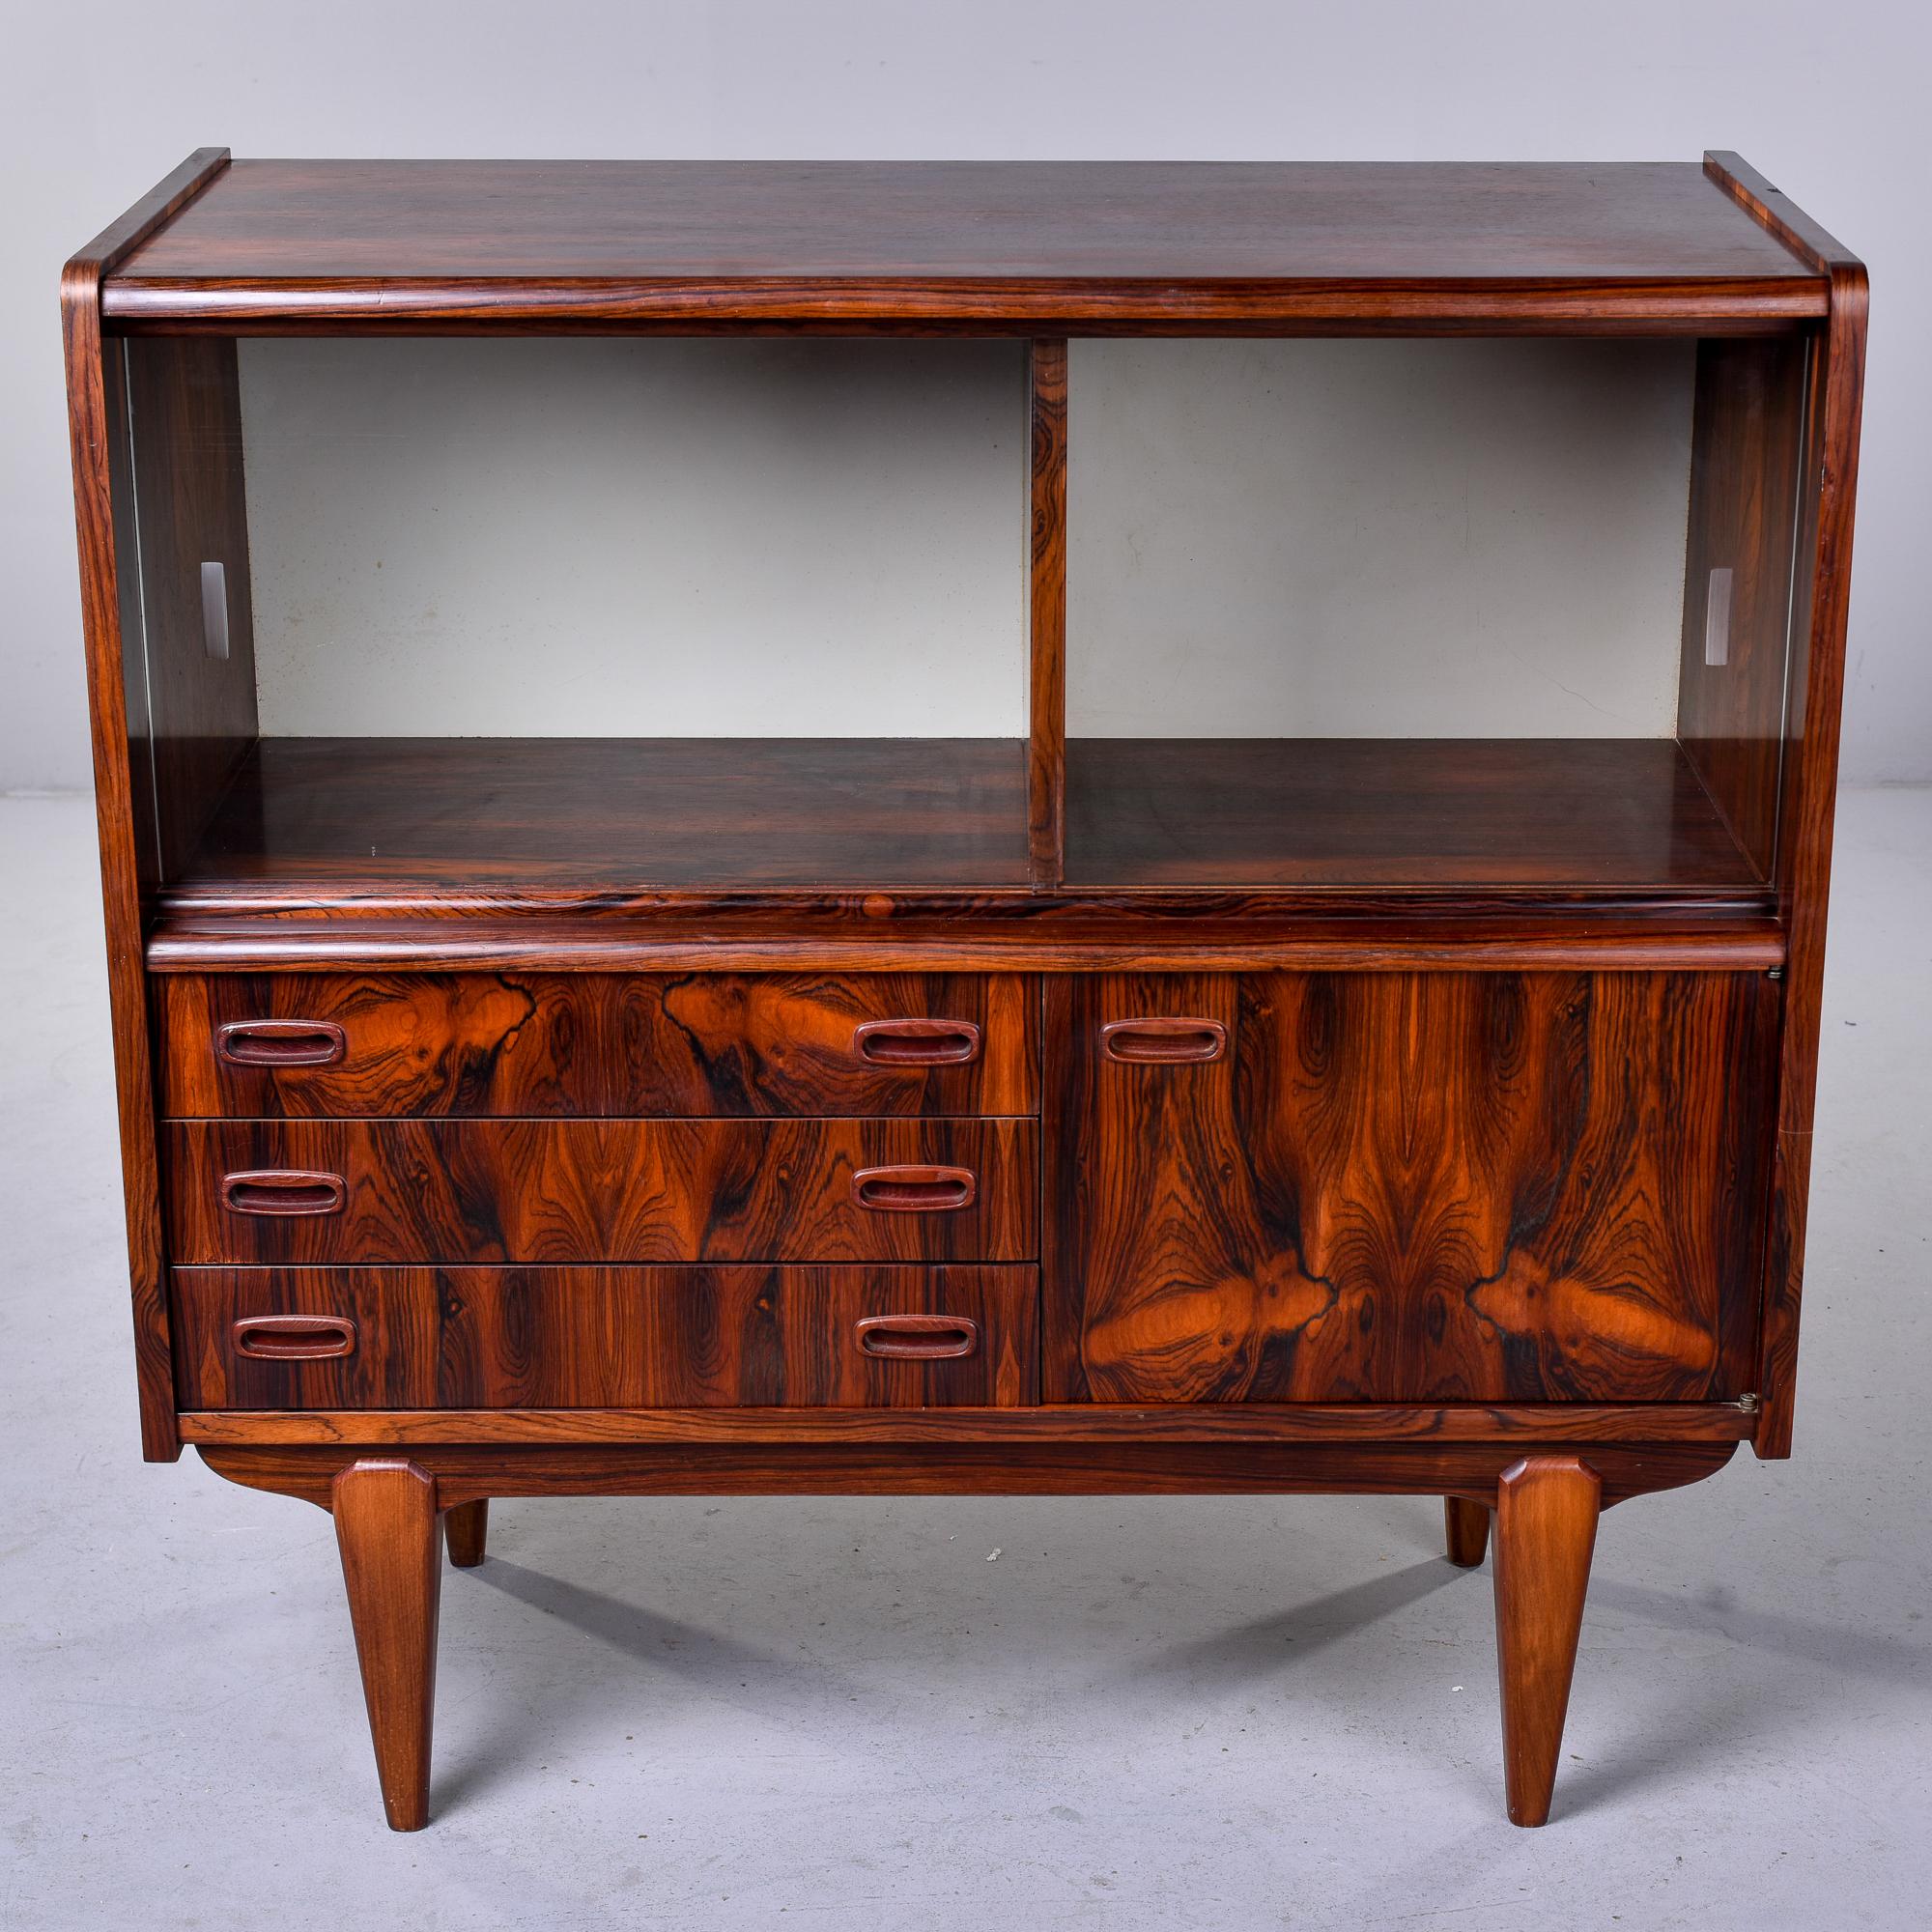 Circa 1970 Scandinavian bar cabinet in dramatically figured rosewood veneer features two sliding glass doors on the top section over three felt lined drawers on one side and a storage compartment with internal shelf on the other. Tapered legs.